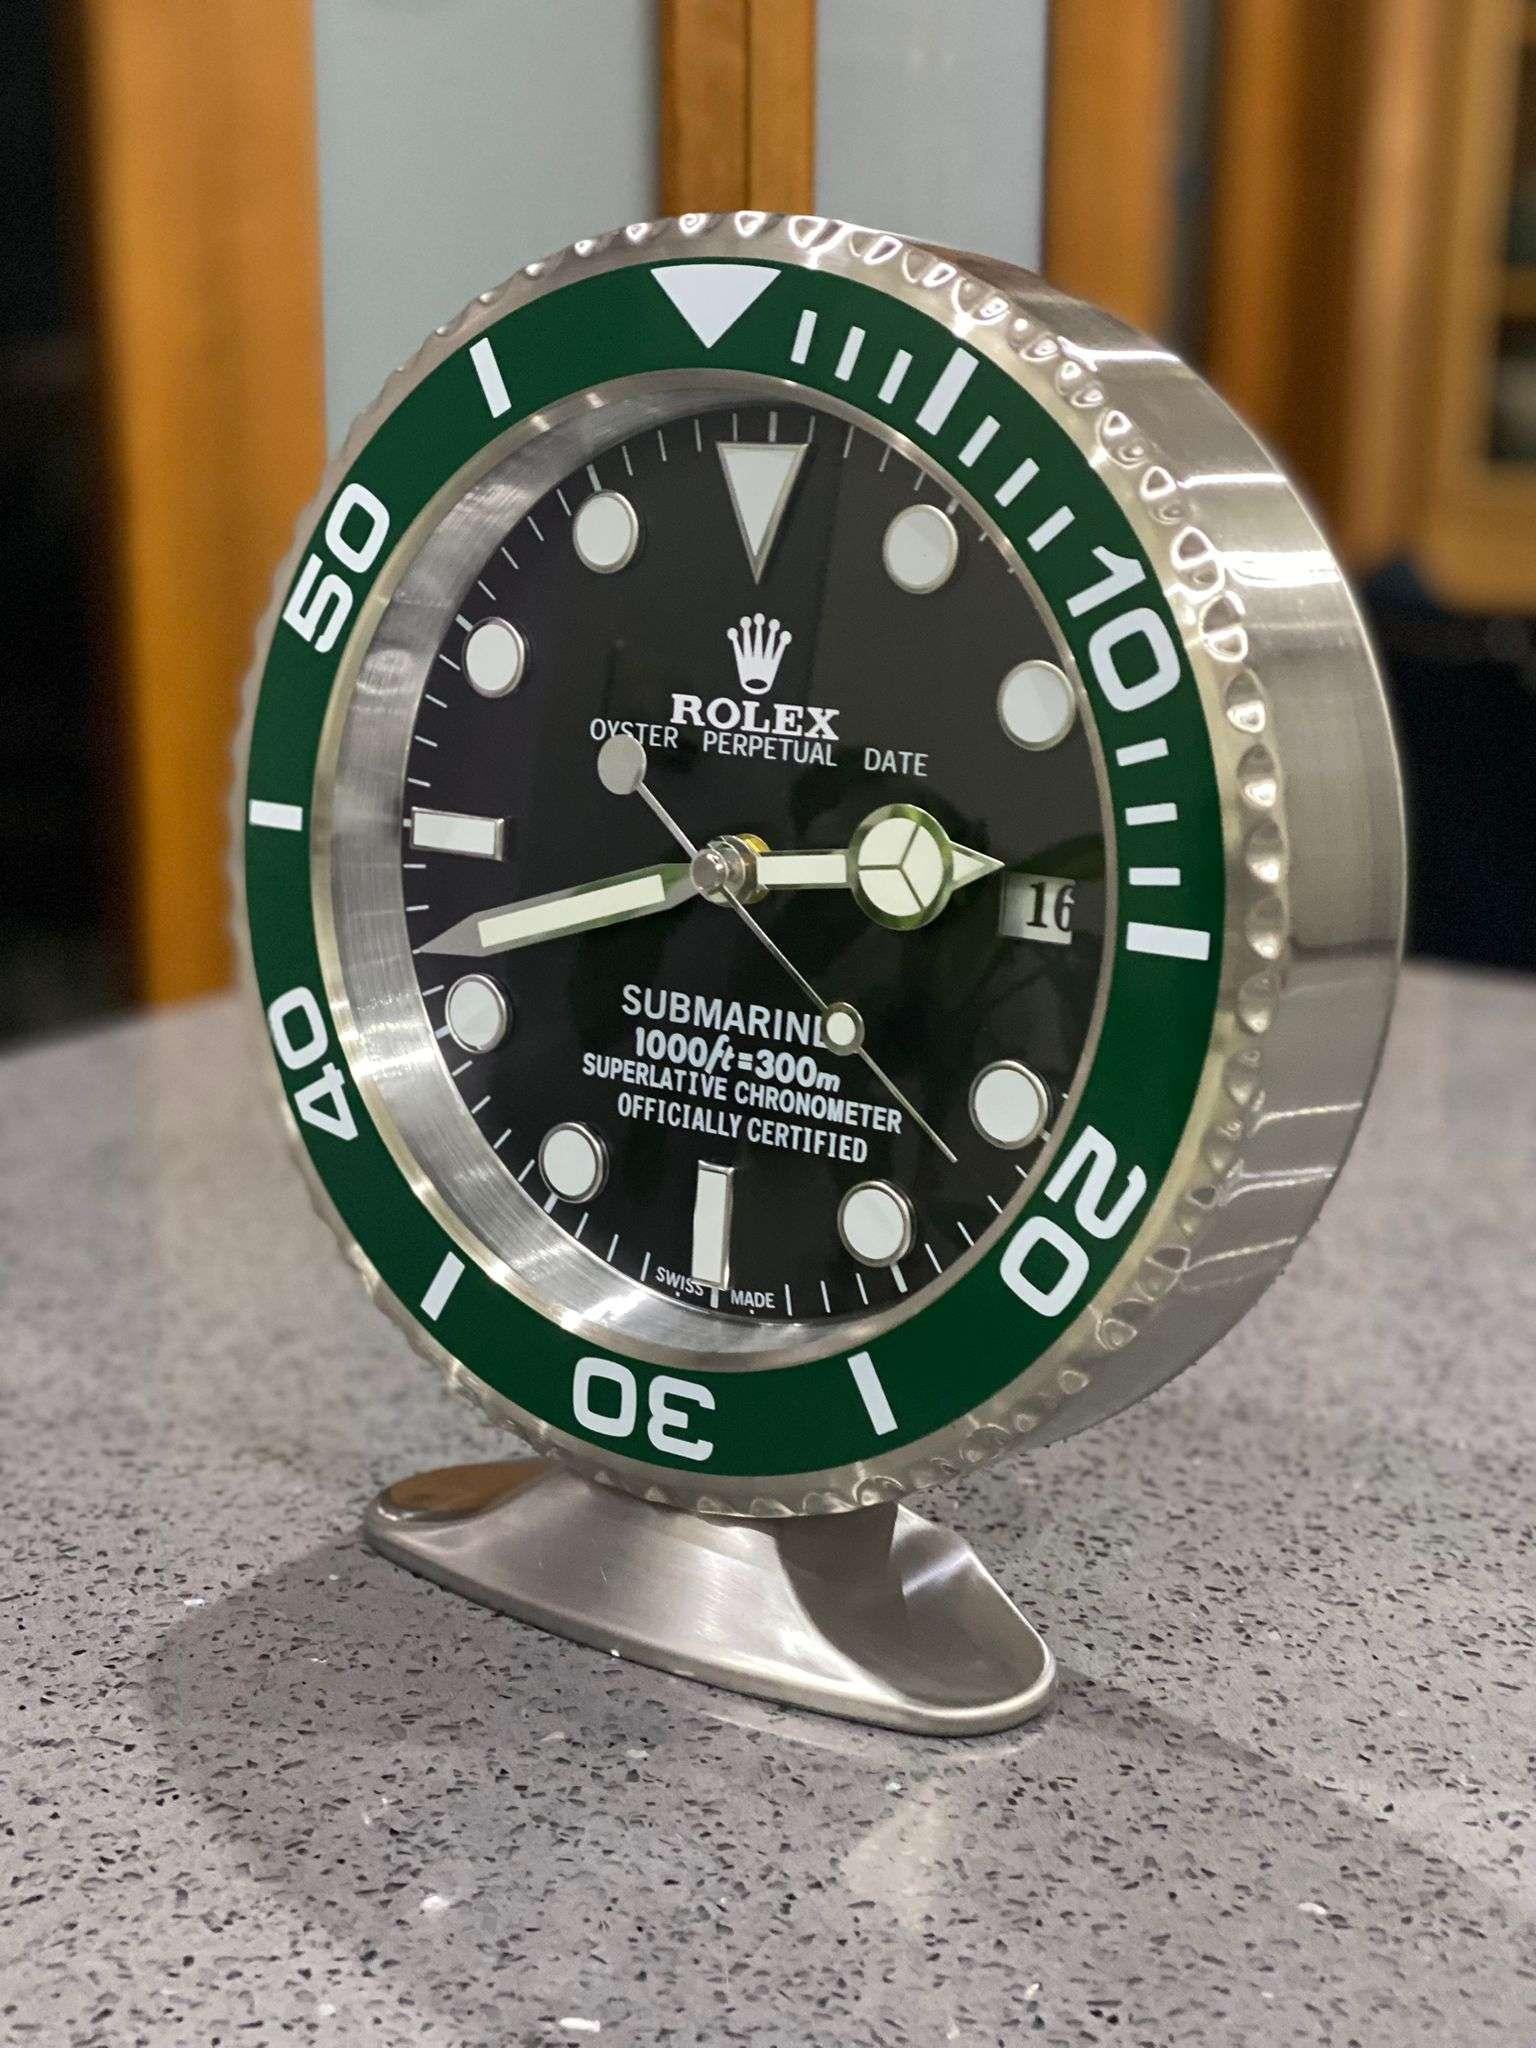 ROLEX Officially Certified Oyster Perpetual Green Hulk Submariner Desk Clock 
Luminous hands.
Fully functional date.
Sweeping hands.
Quartz movement.
Good condition, working.
Free international shipping.